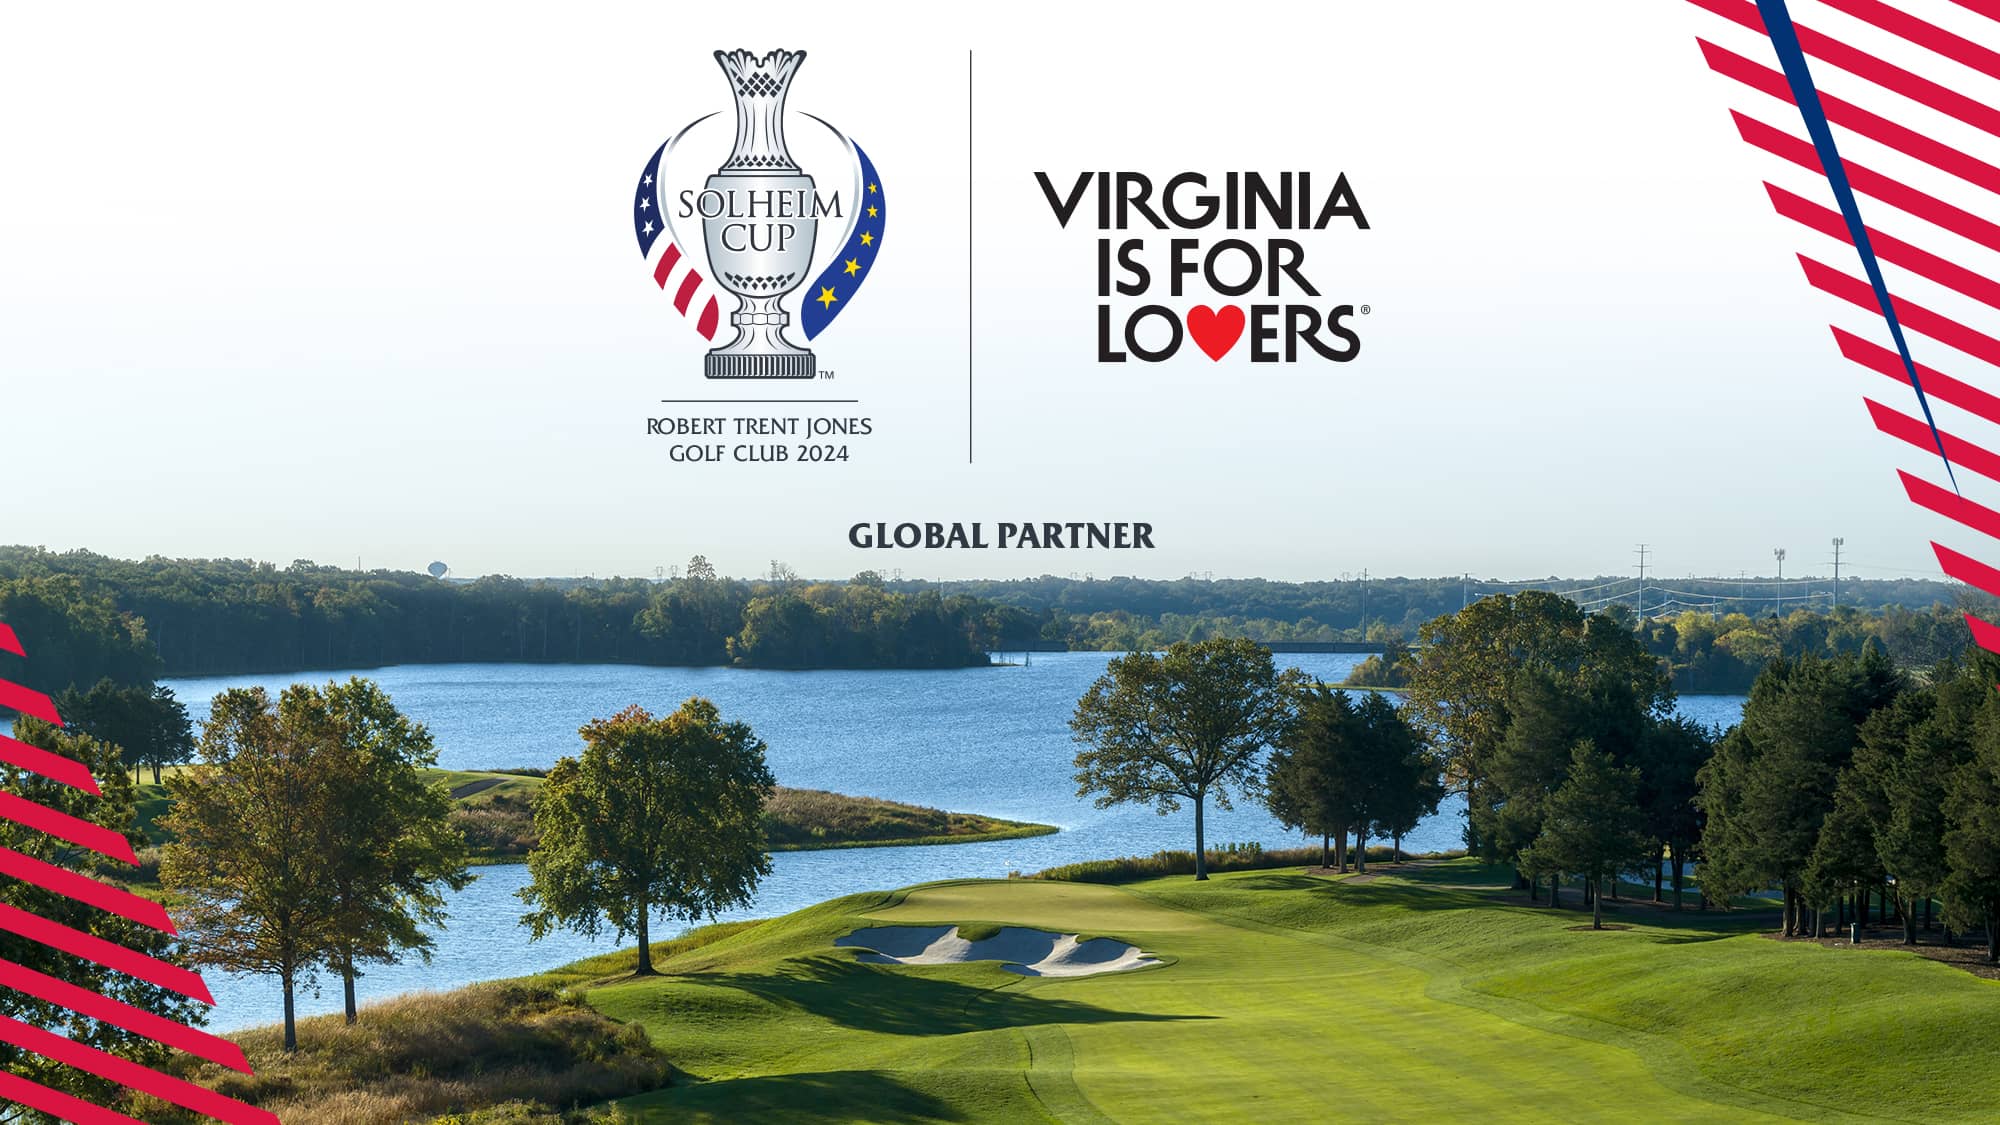 Virginia Tourism Corporation Named Global Partner of the 2024 Solheim Cup